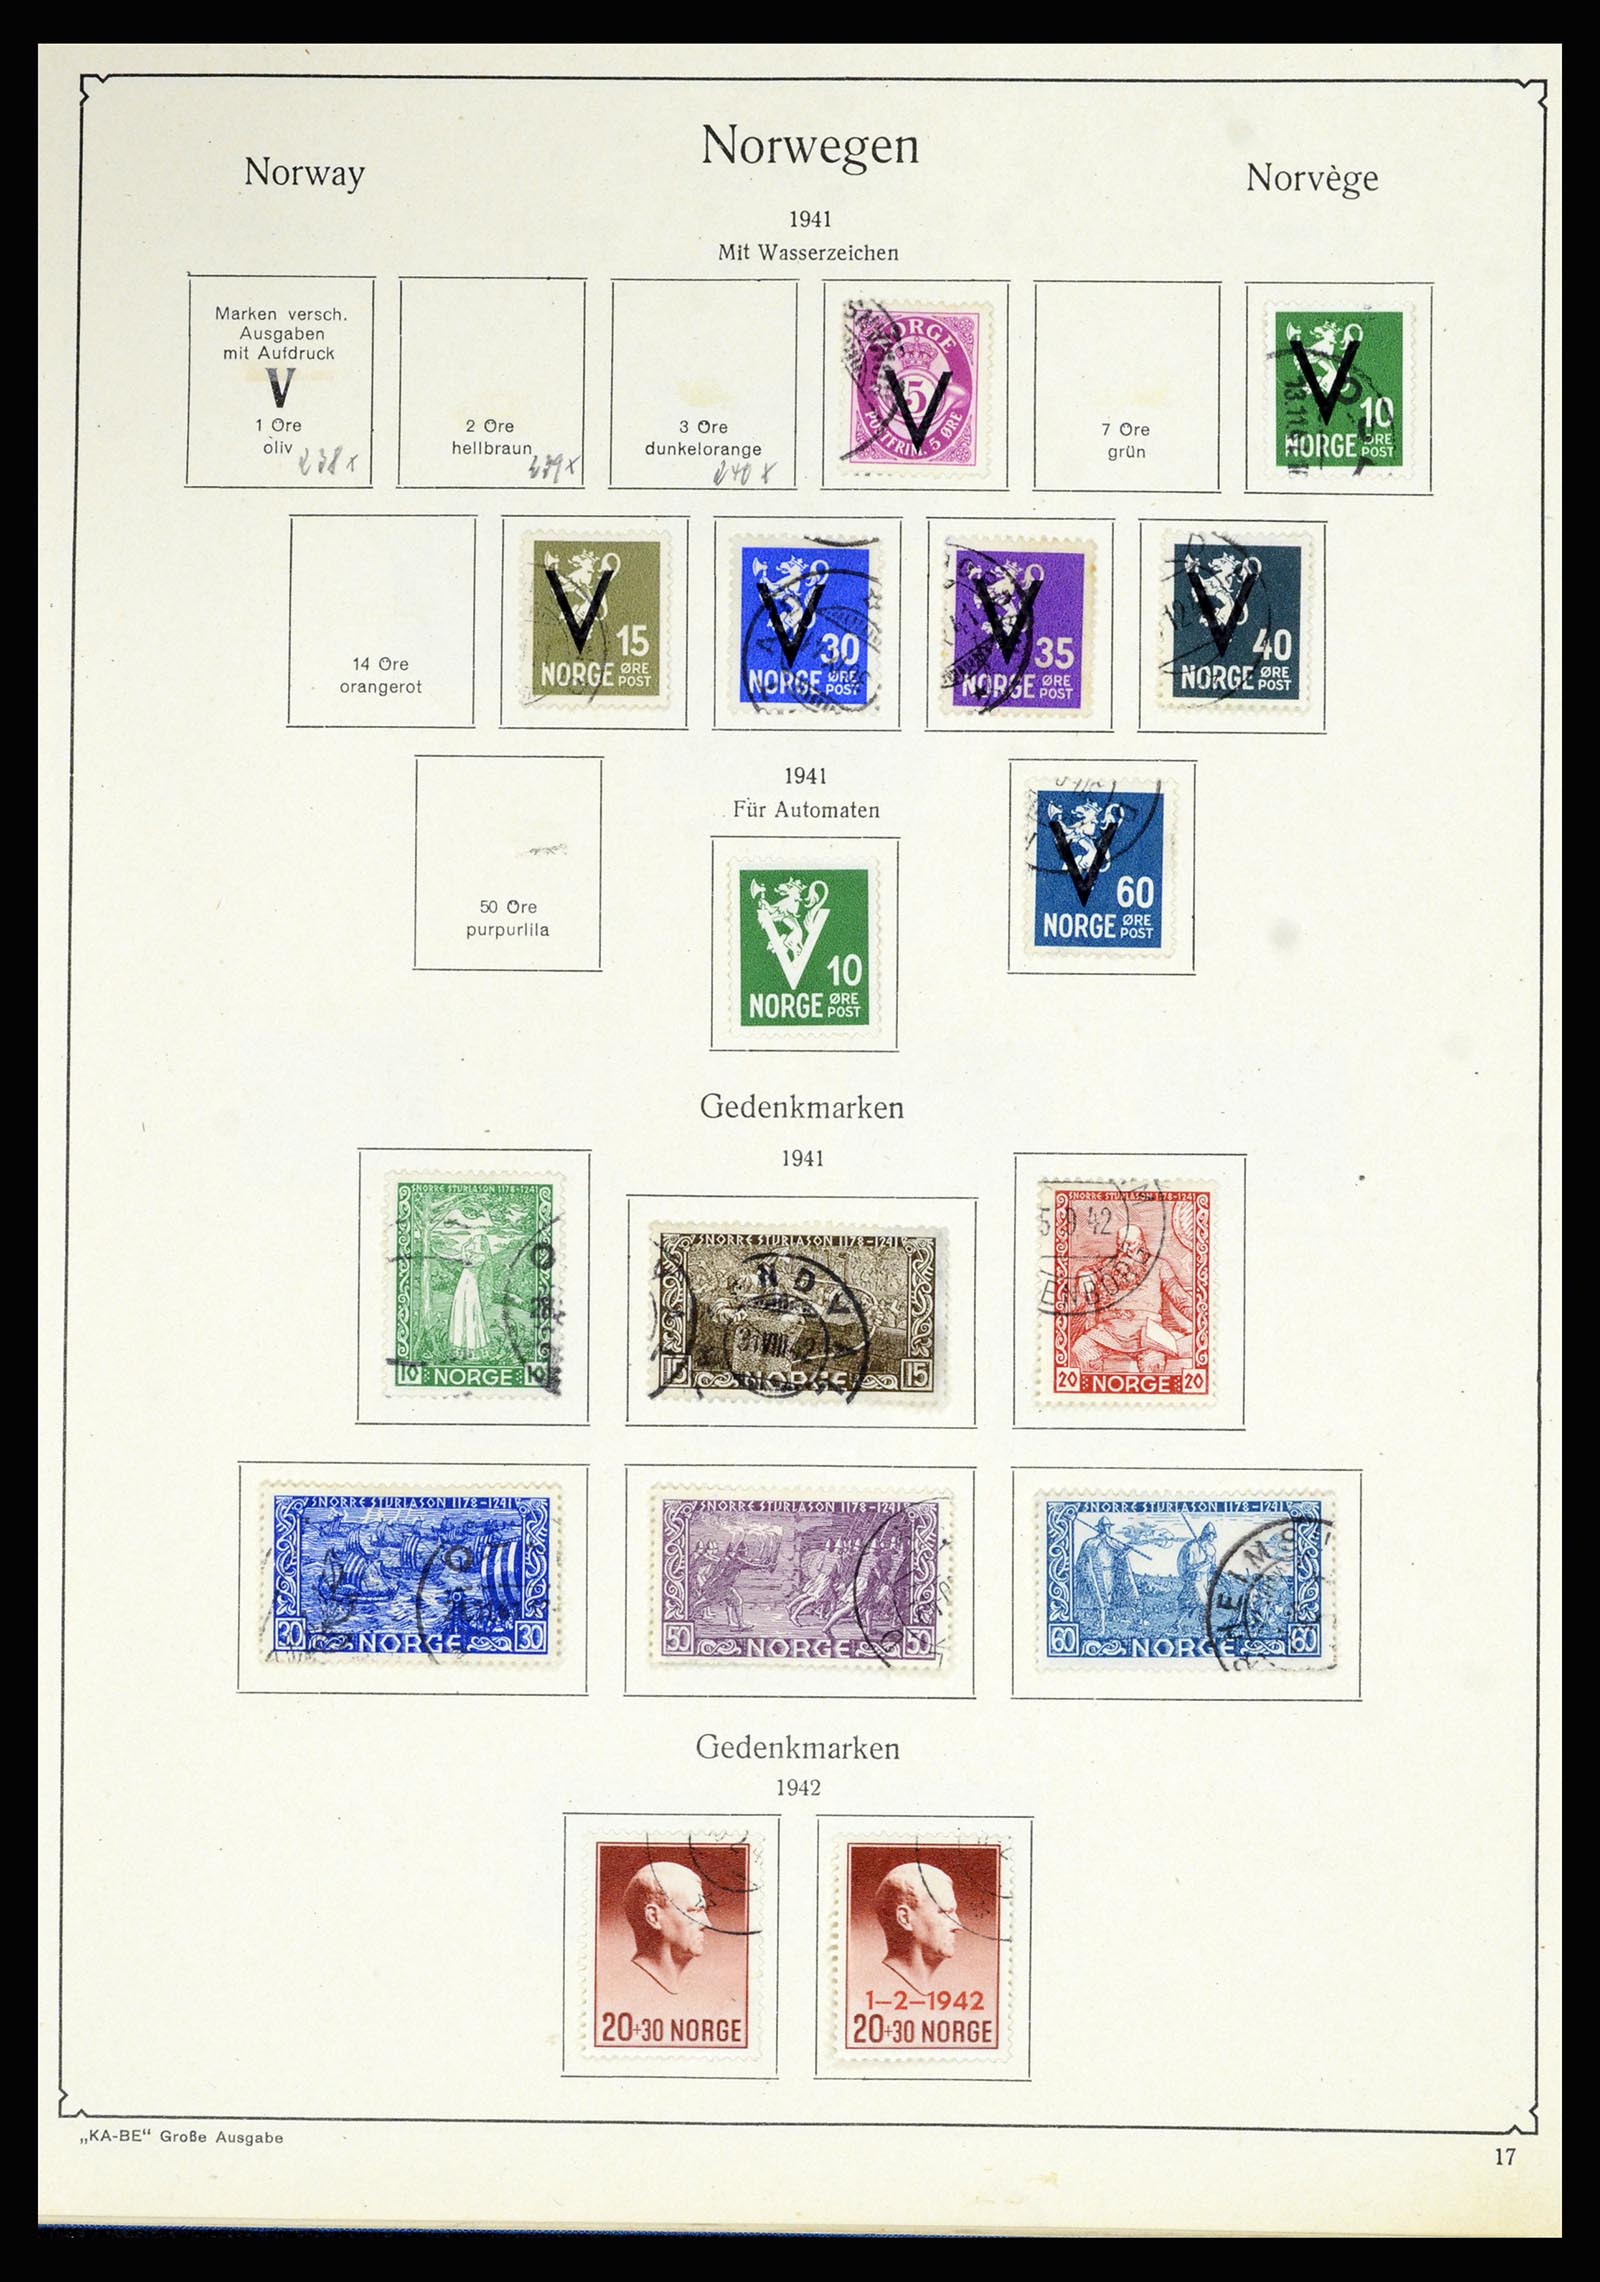 36903 017 - Stamp collection 36903 Norway 1856-1970.